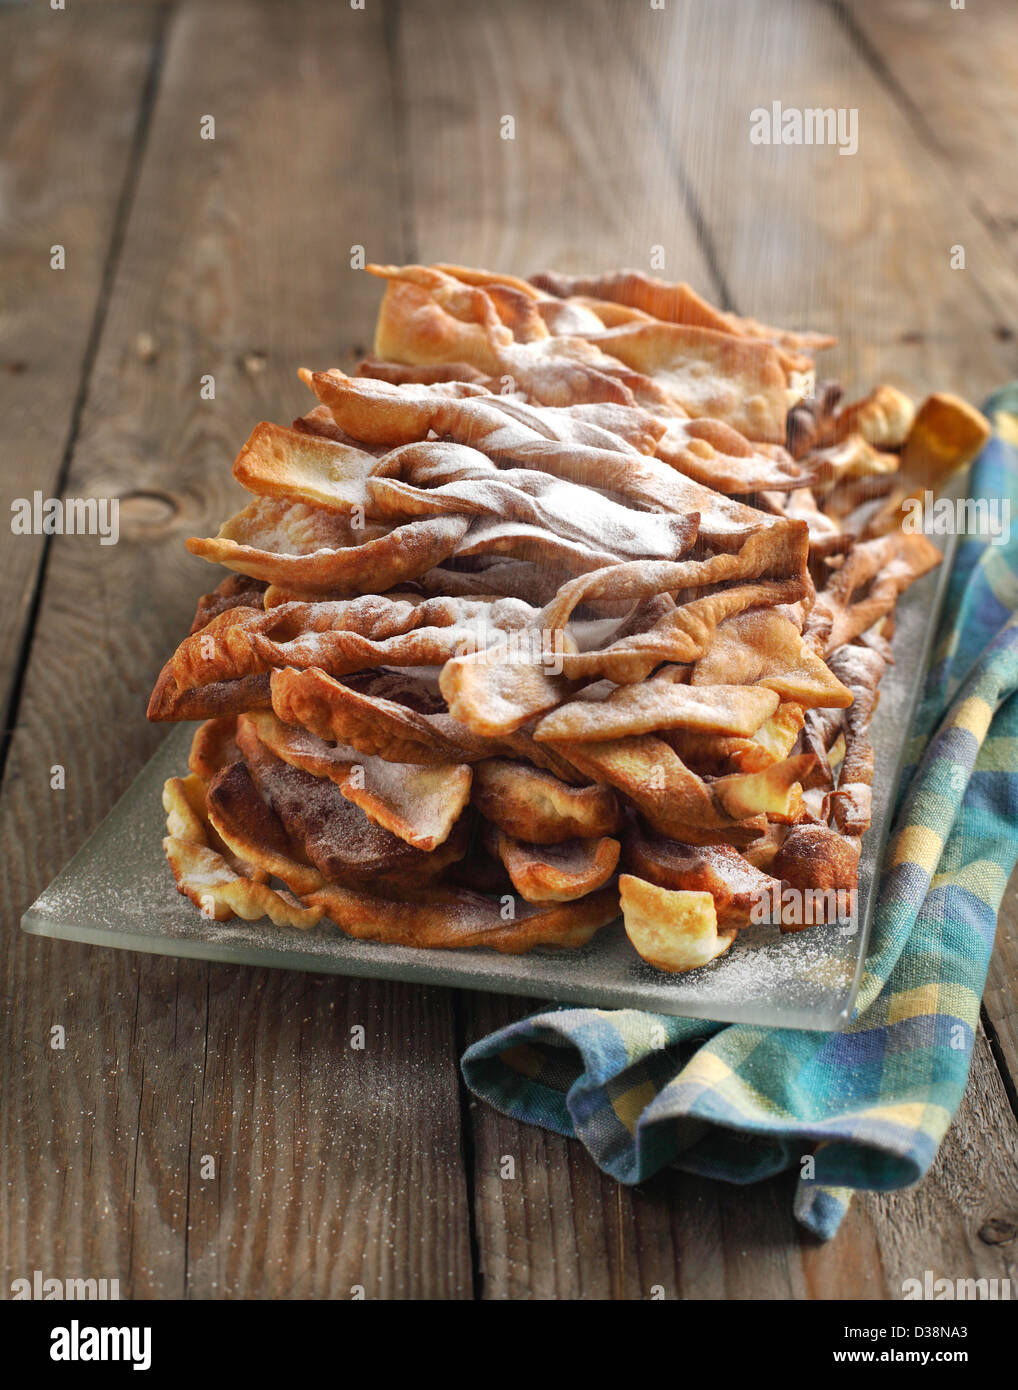 Sweet deep fried pastry Stock Photo